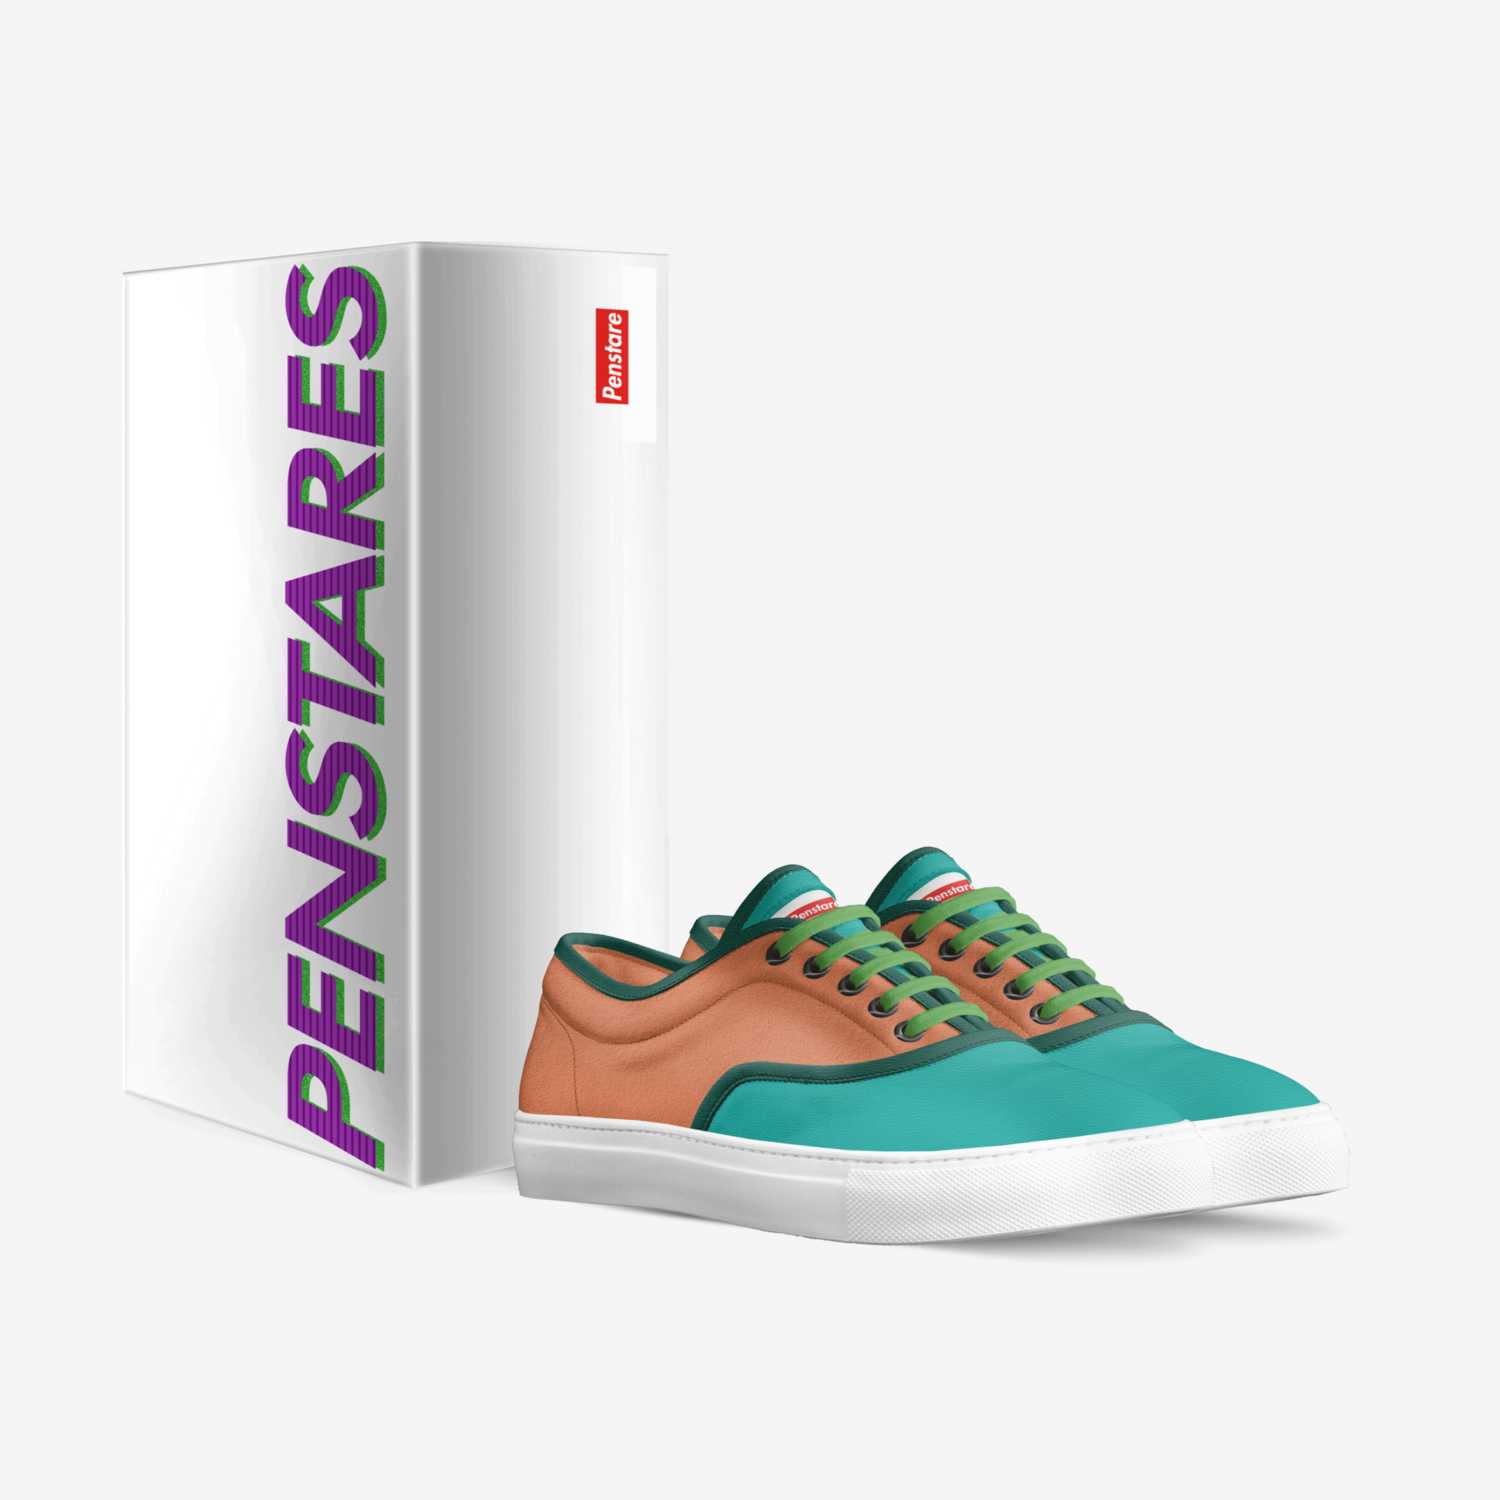 Penstare custom made in Italy shoes by Penstare Outlet | Box view